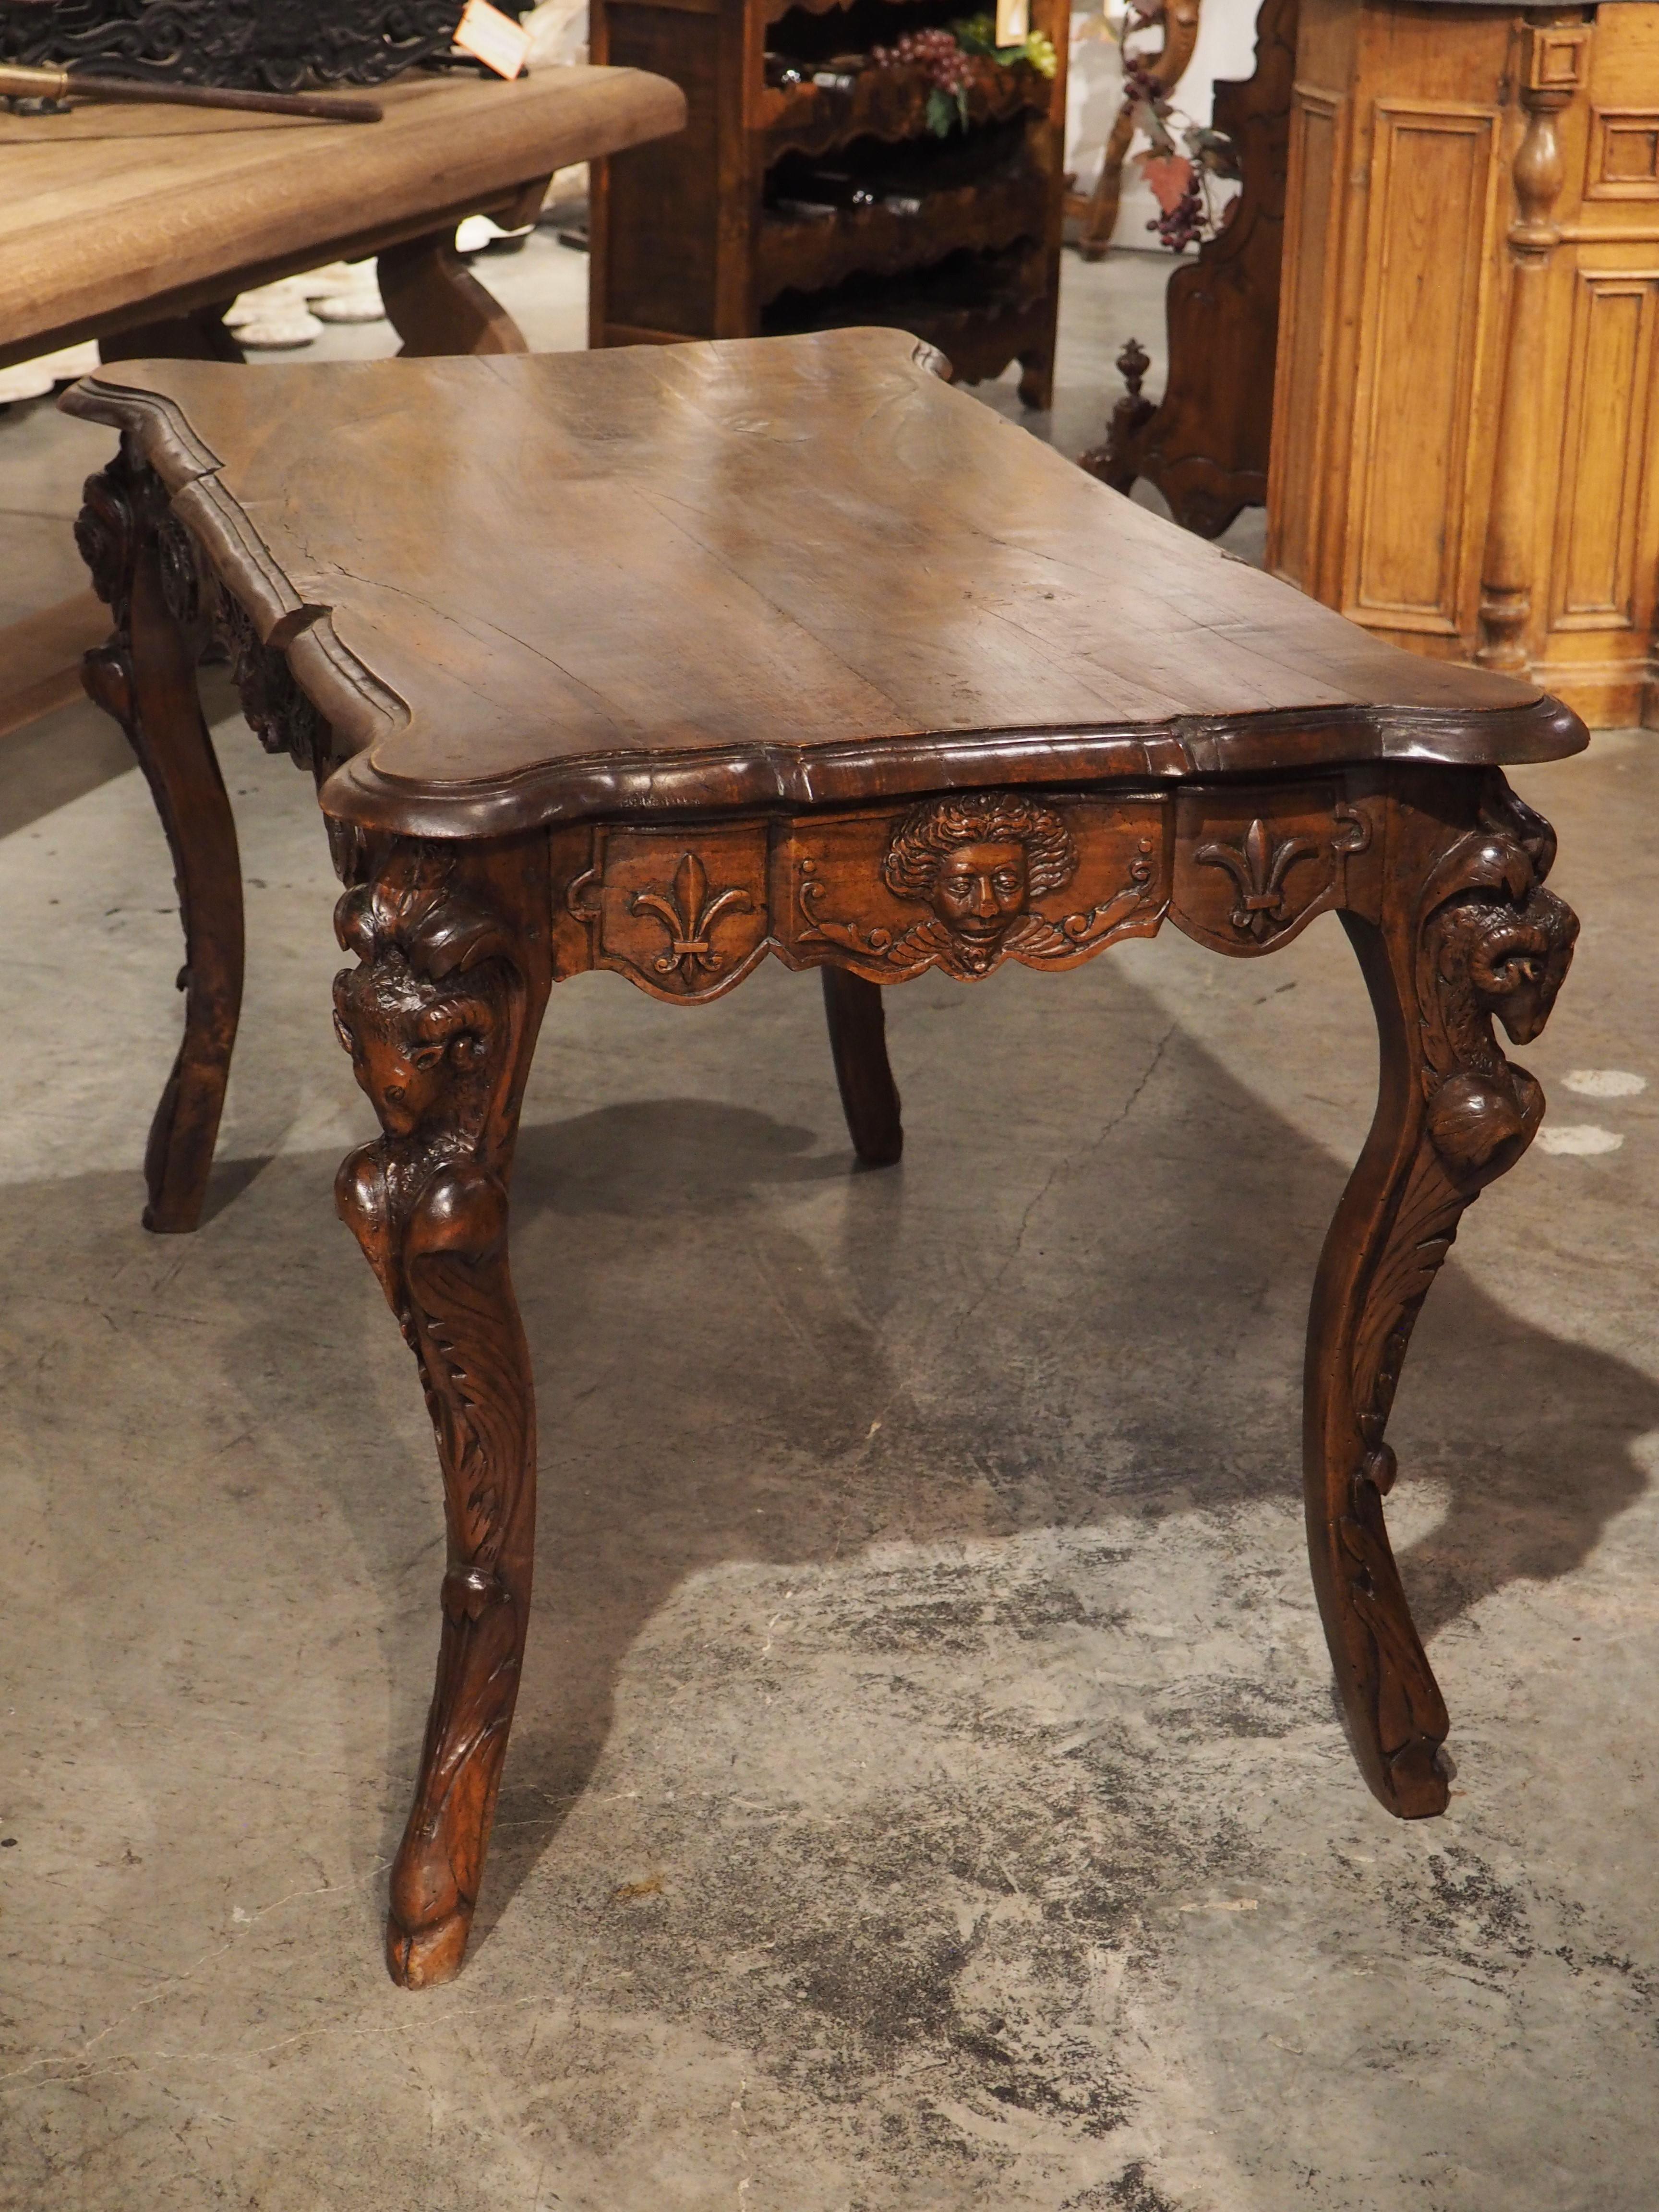 Circa 1870 French Walnut Wood Center Table with Rams' Heads and Fleur De Lys For Sale 7